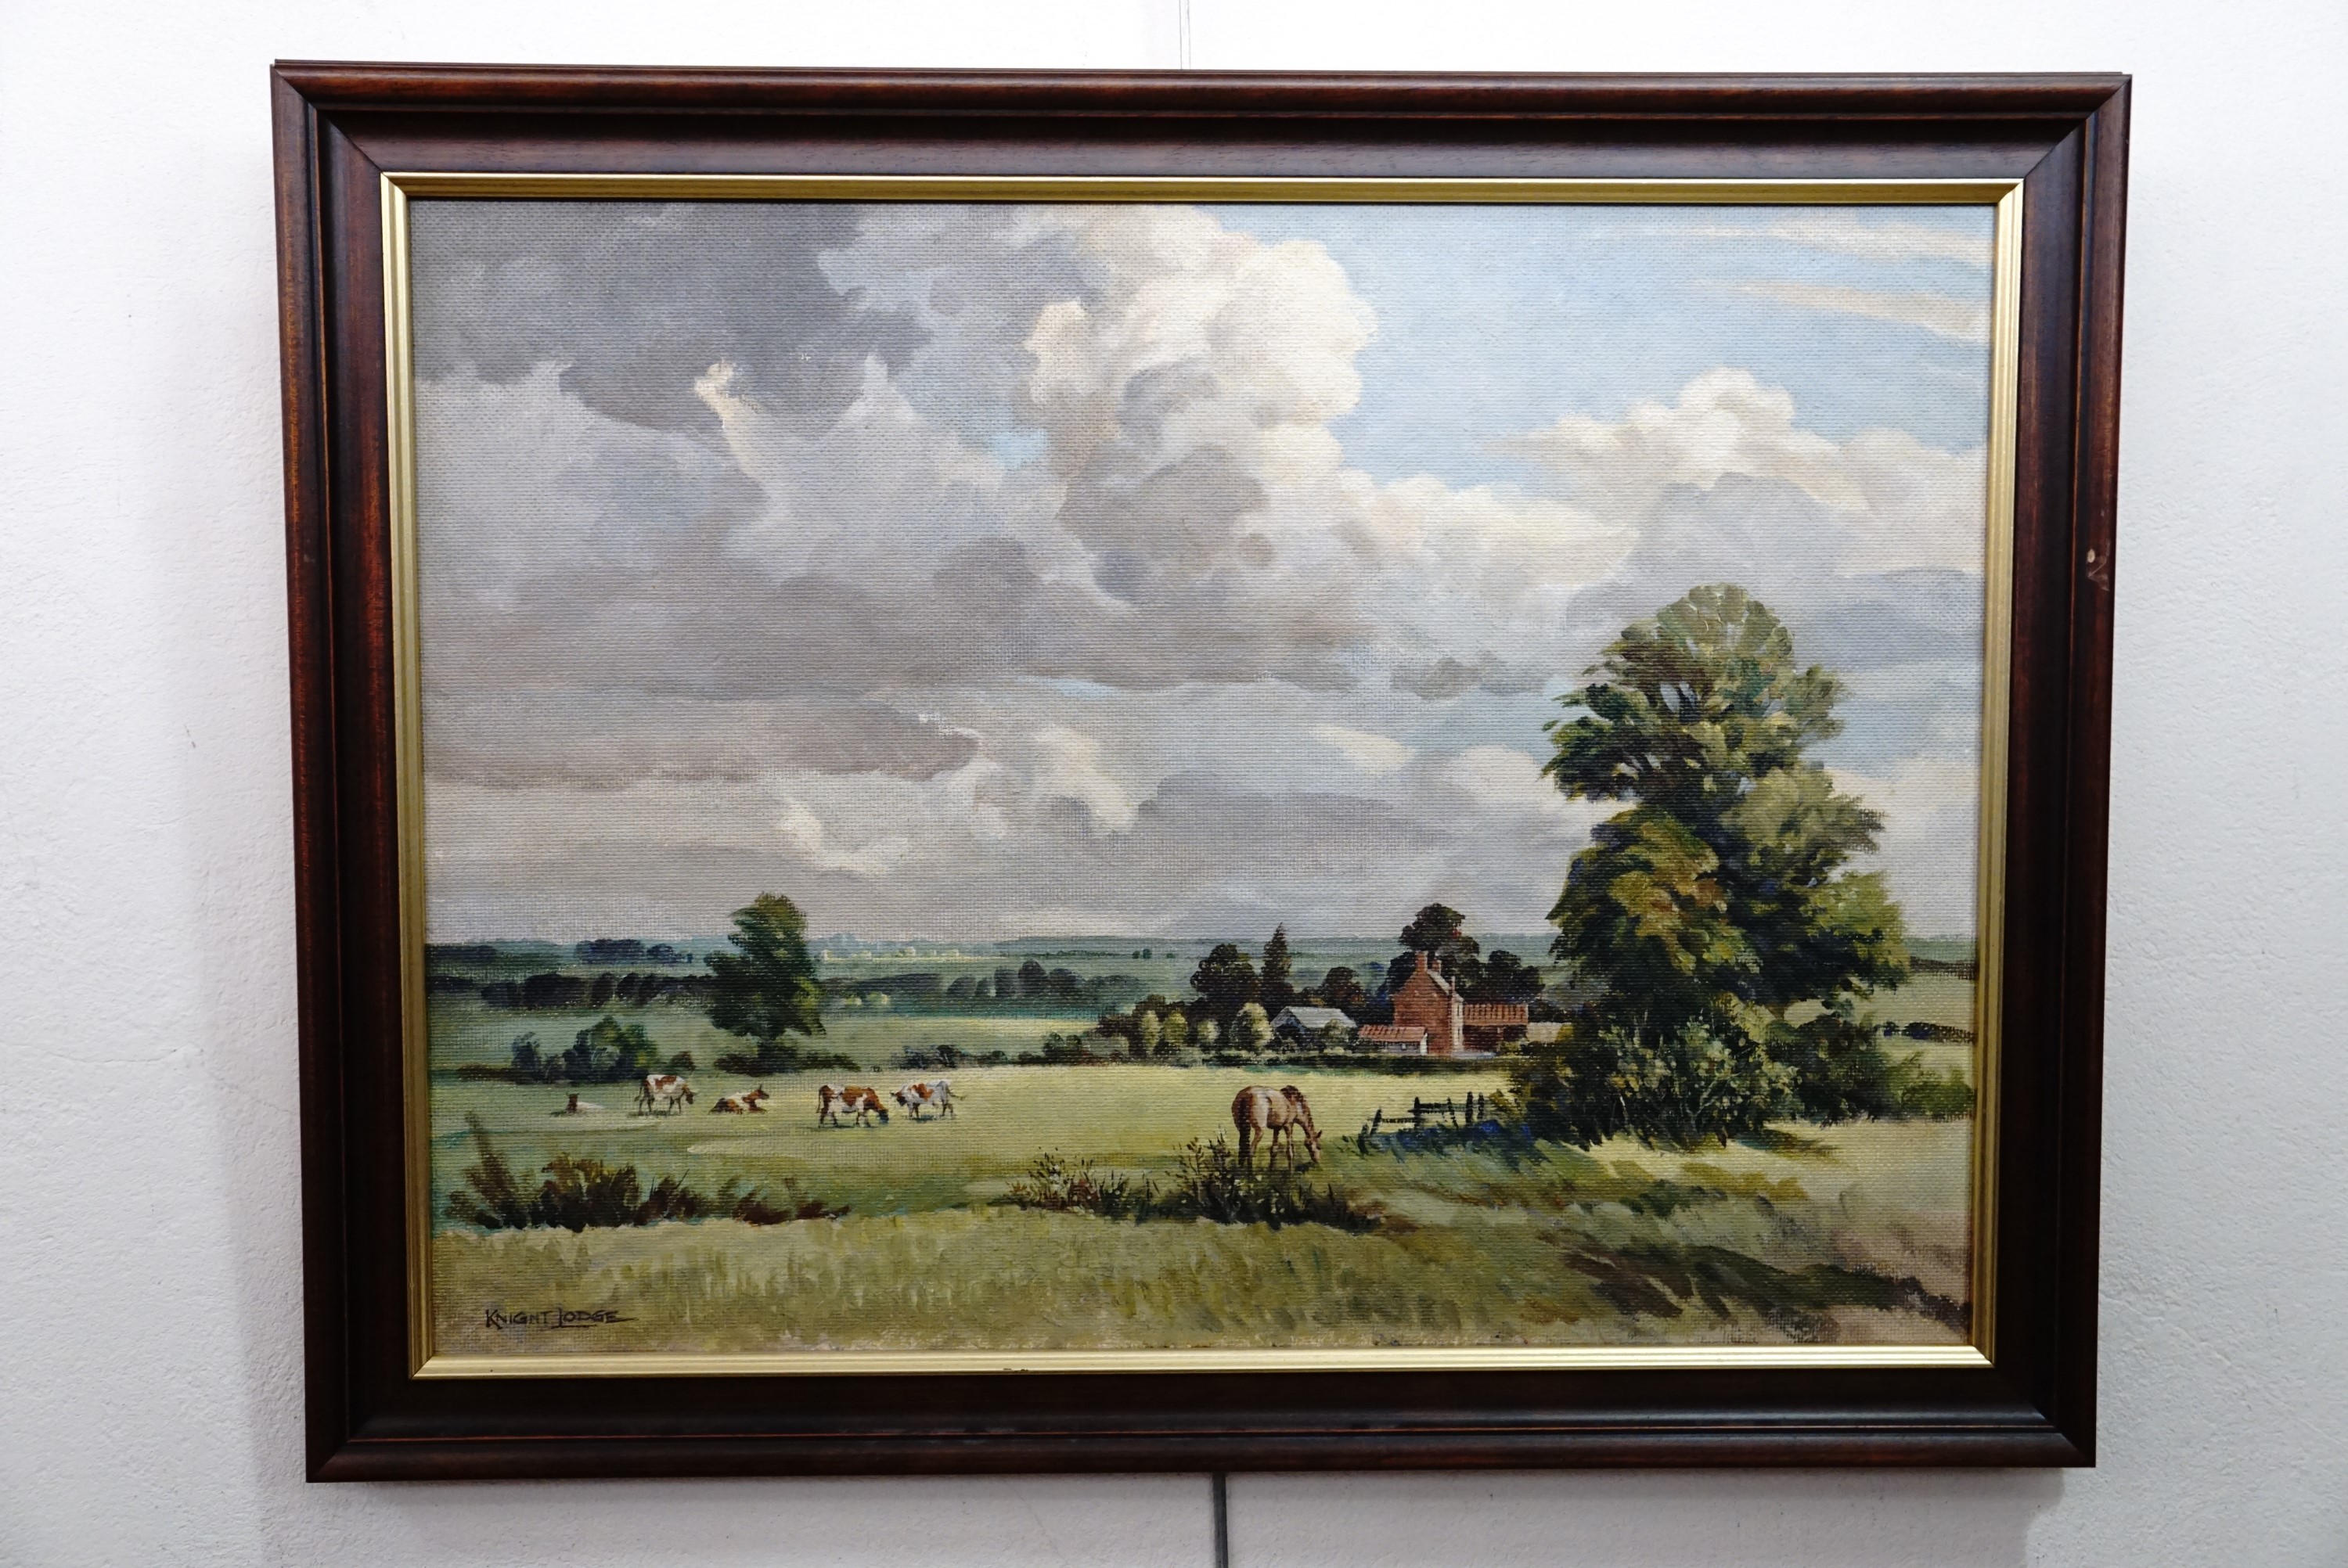 W*** Knight Lodge (20th Century) "Norfolk Countryside", blustery Impressionistic depiction of a